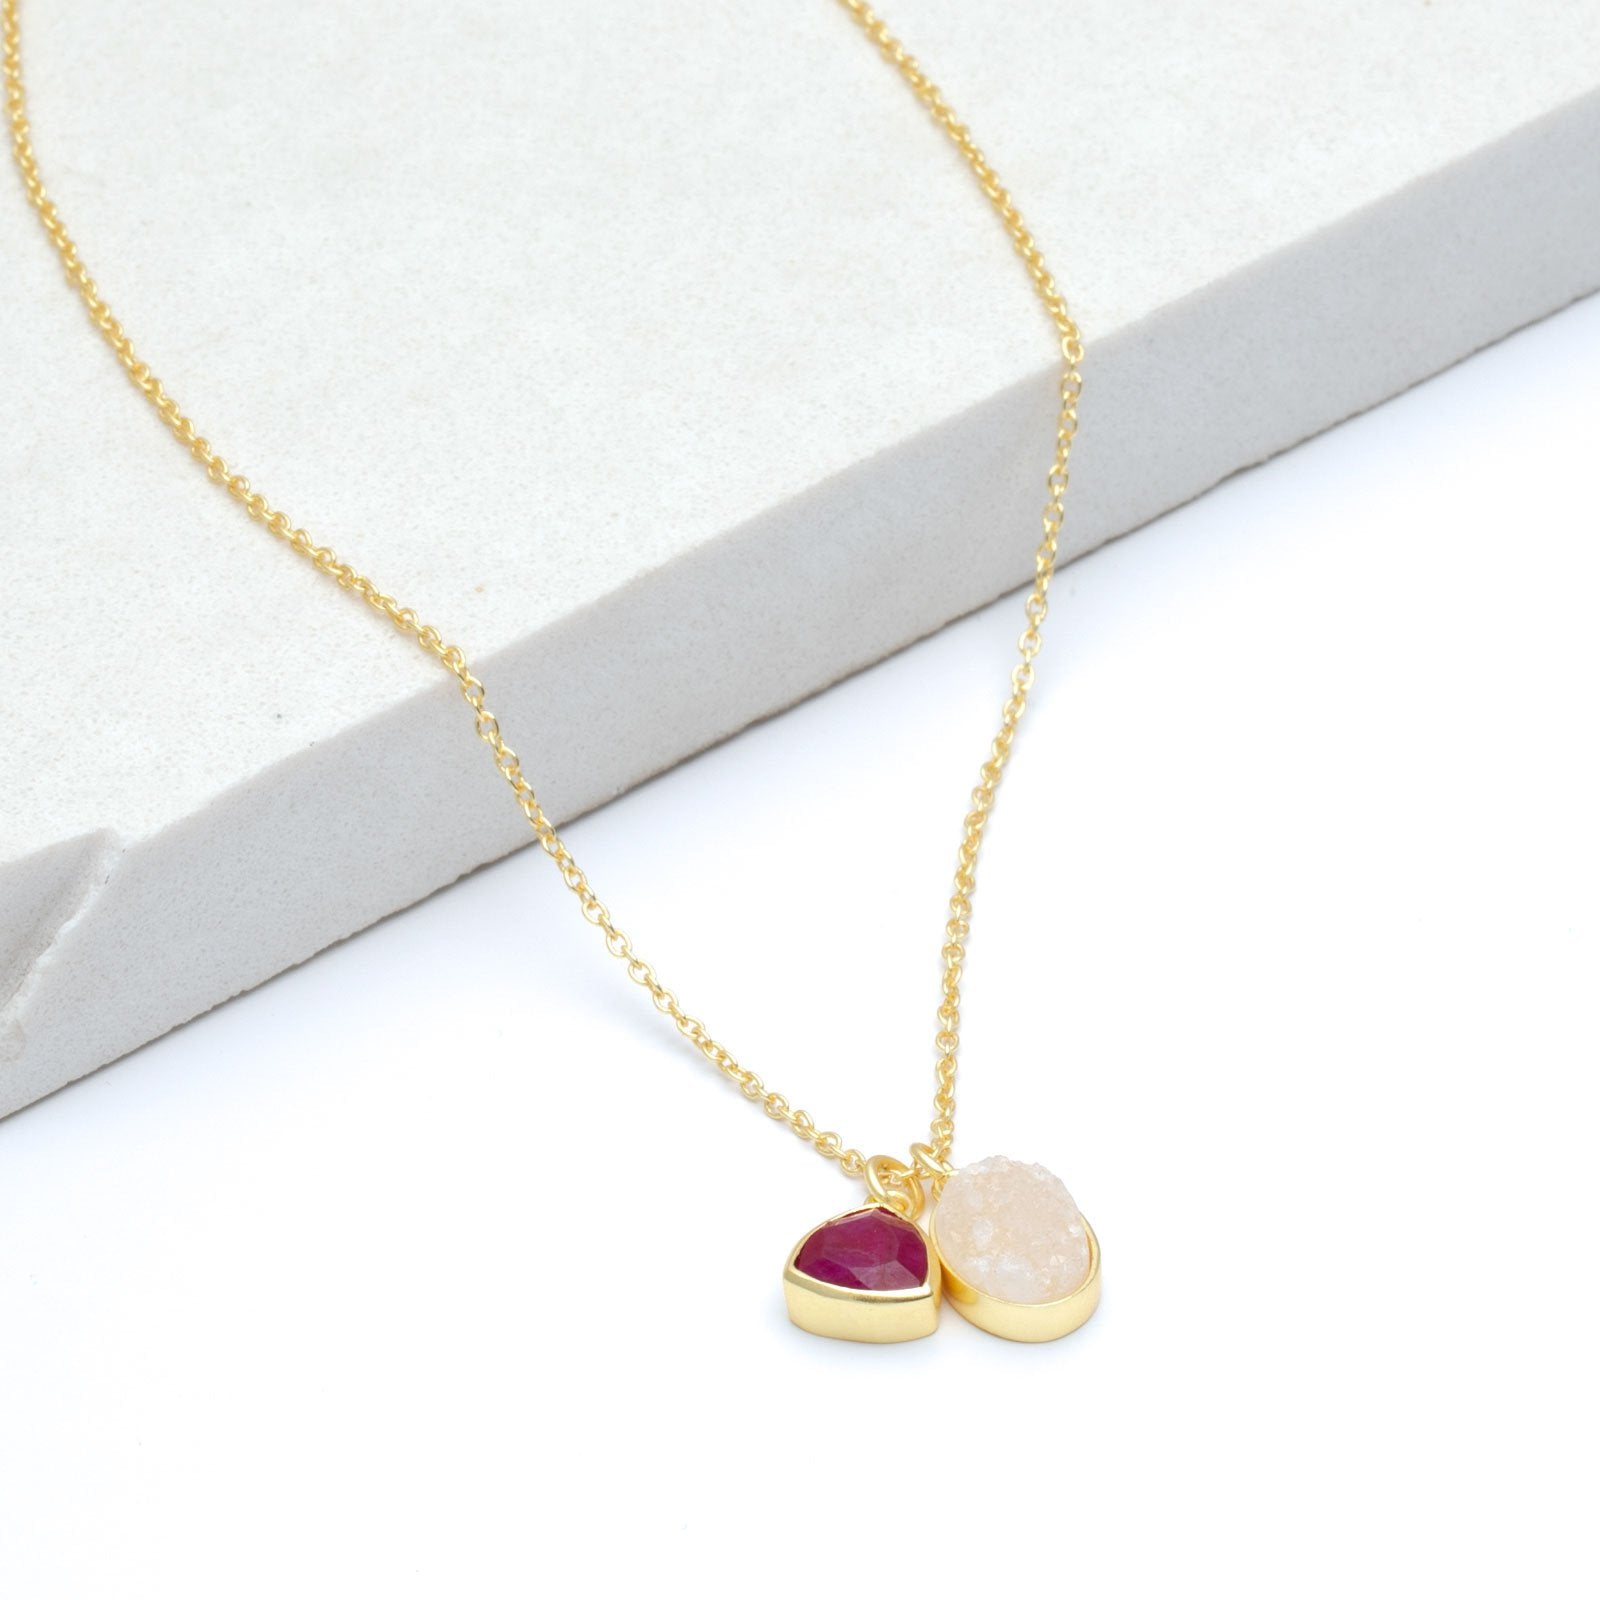 White Druzy &amp; Cherry Ruby Double Pendant Necklace, 18” - Gold Plated Necklace - rockflowerpaper